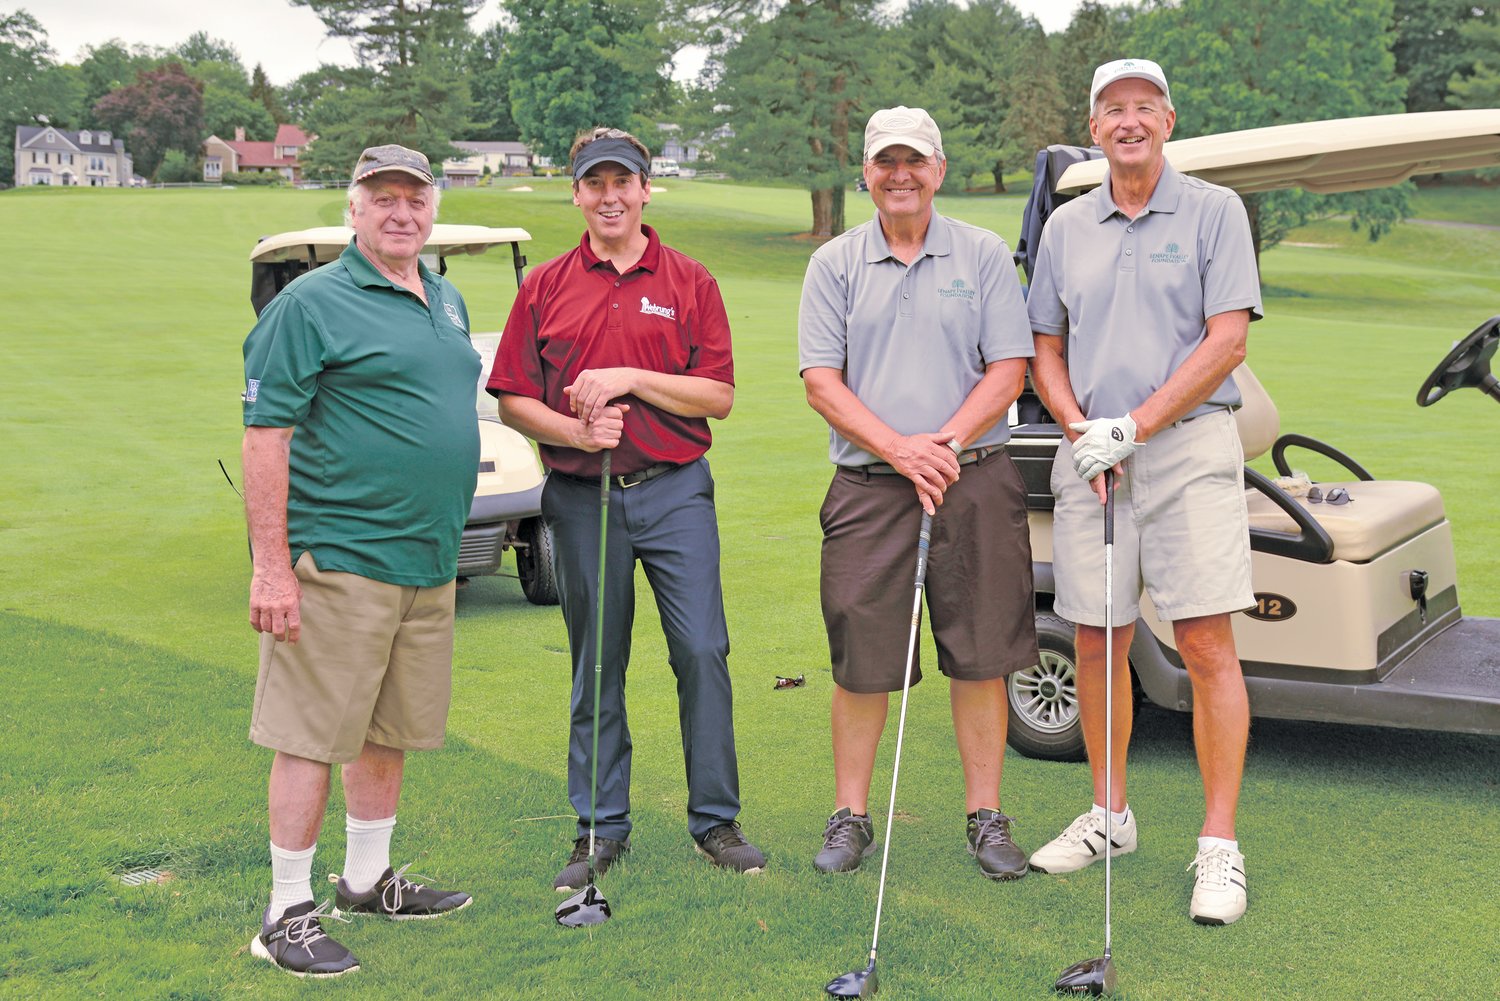 At Lenape Valley Foundation’s 12th annual Golf Outing are: from left, Wesley Pericone, former LVF board member; Len Refford of Wehrung’s Lumber & Home Center; Robert Rogala, LVF board member/golf chairperson; and Alan Hart, former LVF CEO.